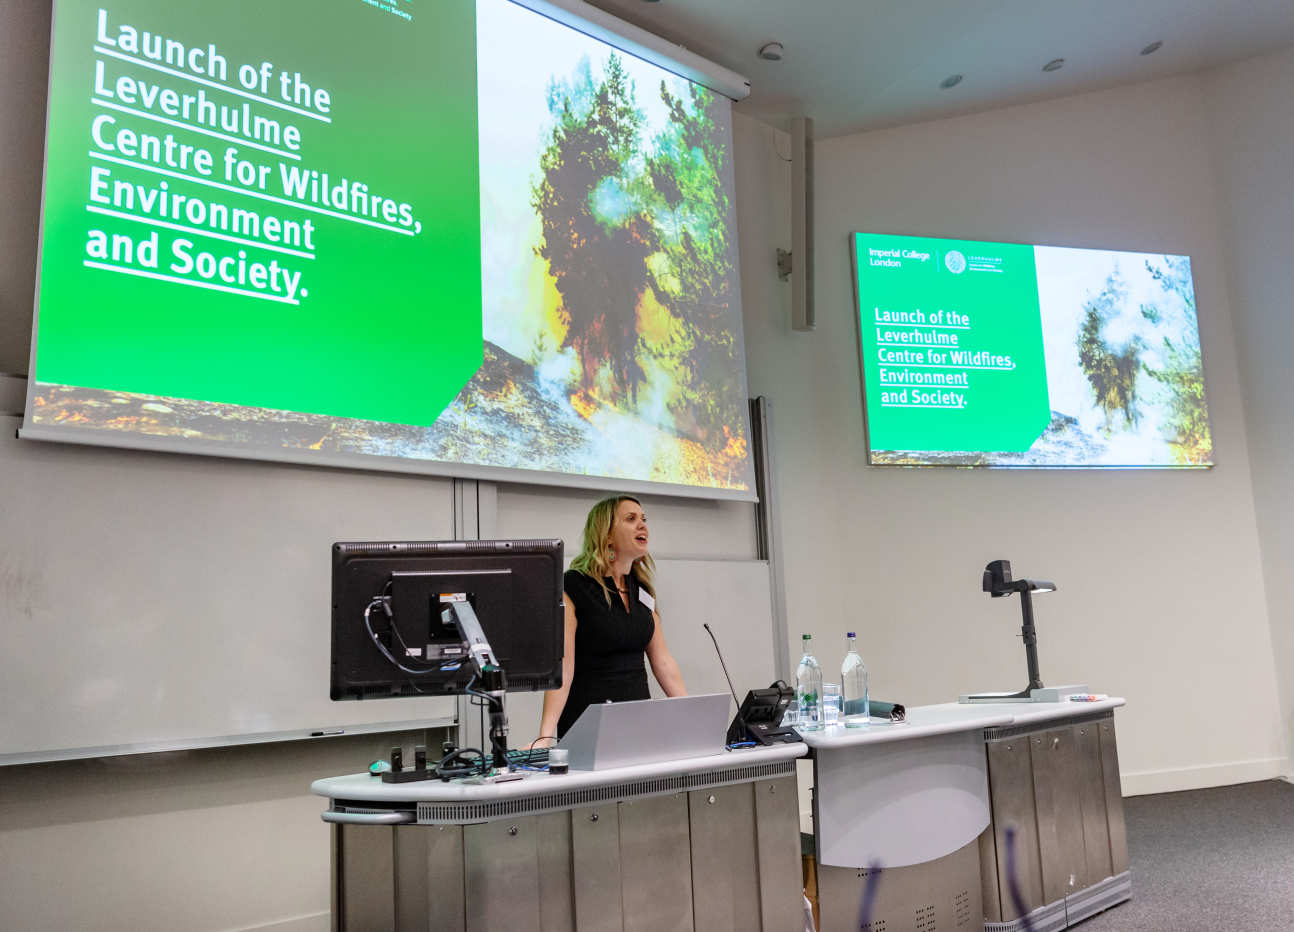 Speaker at launch of Leverhulme Centre for Wildfires